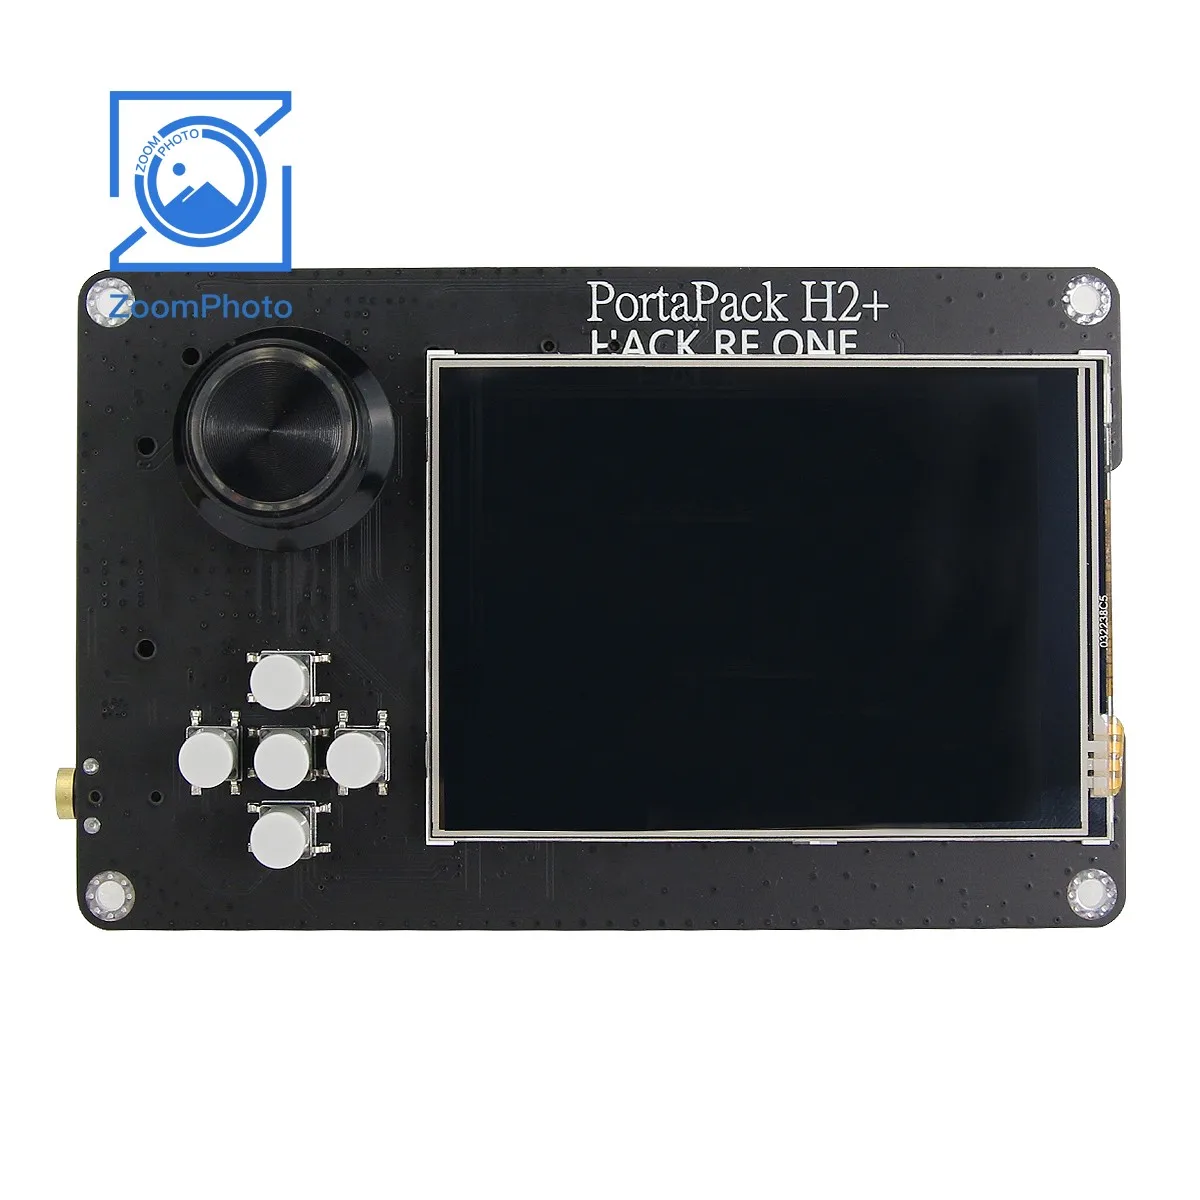 upgraded-32-inch-portapack-h2-with-dip14-active-crystal-oscillator-hackrf-one-expansion-board